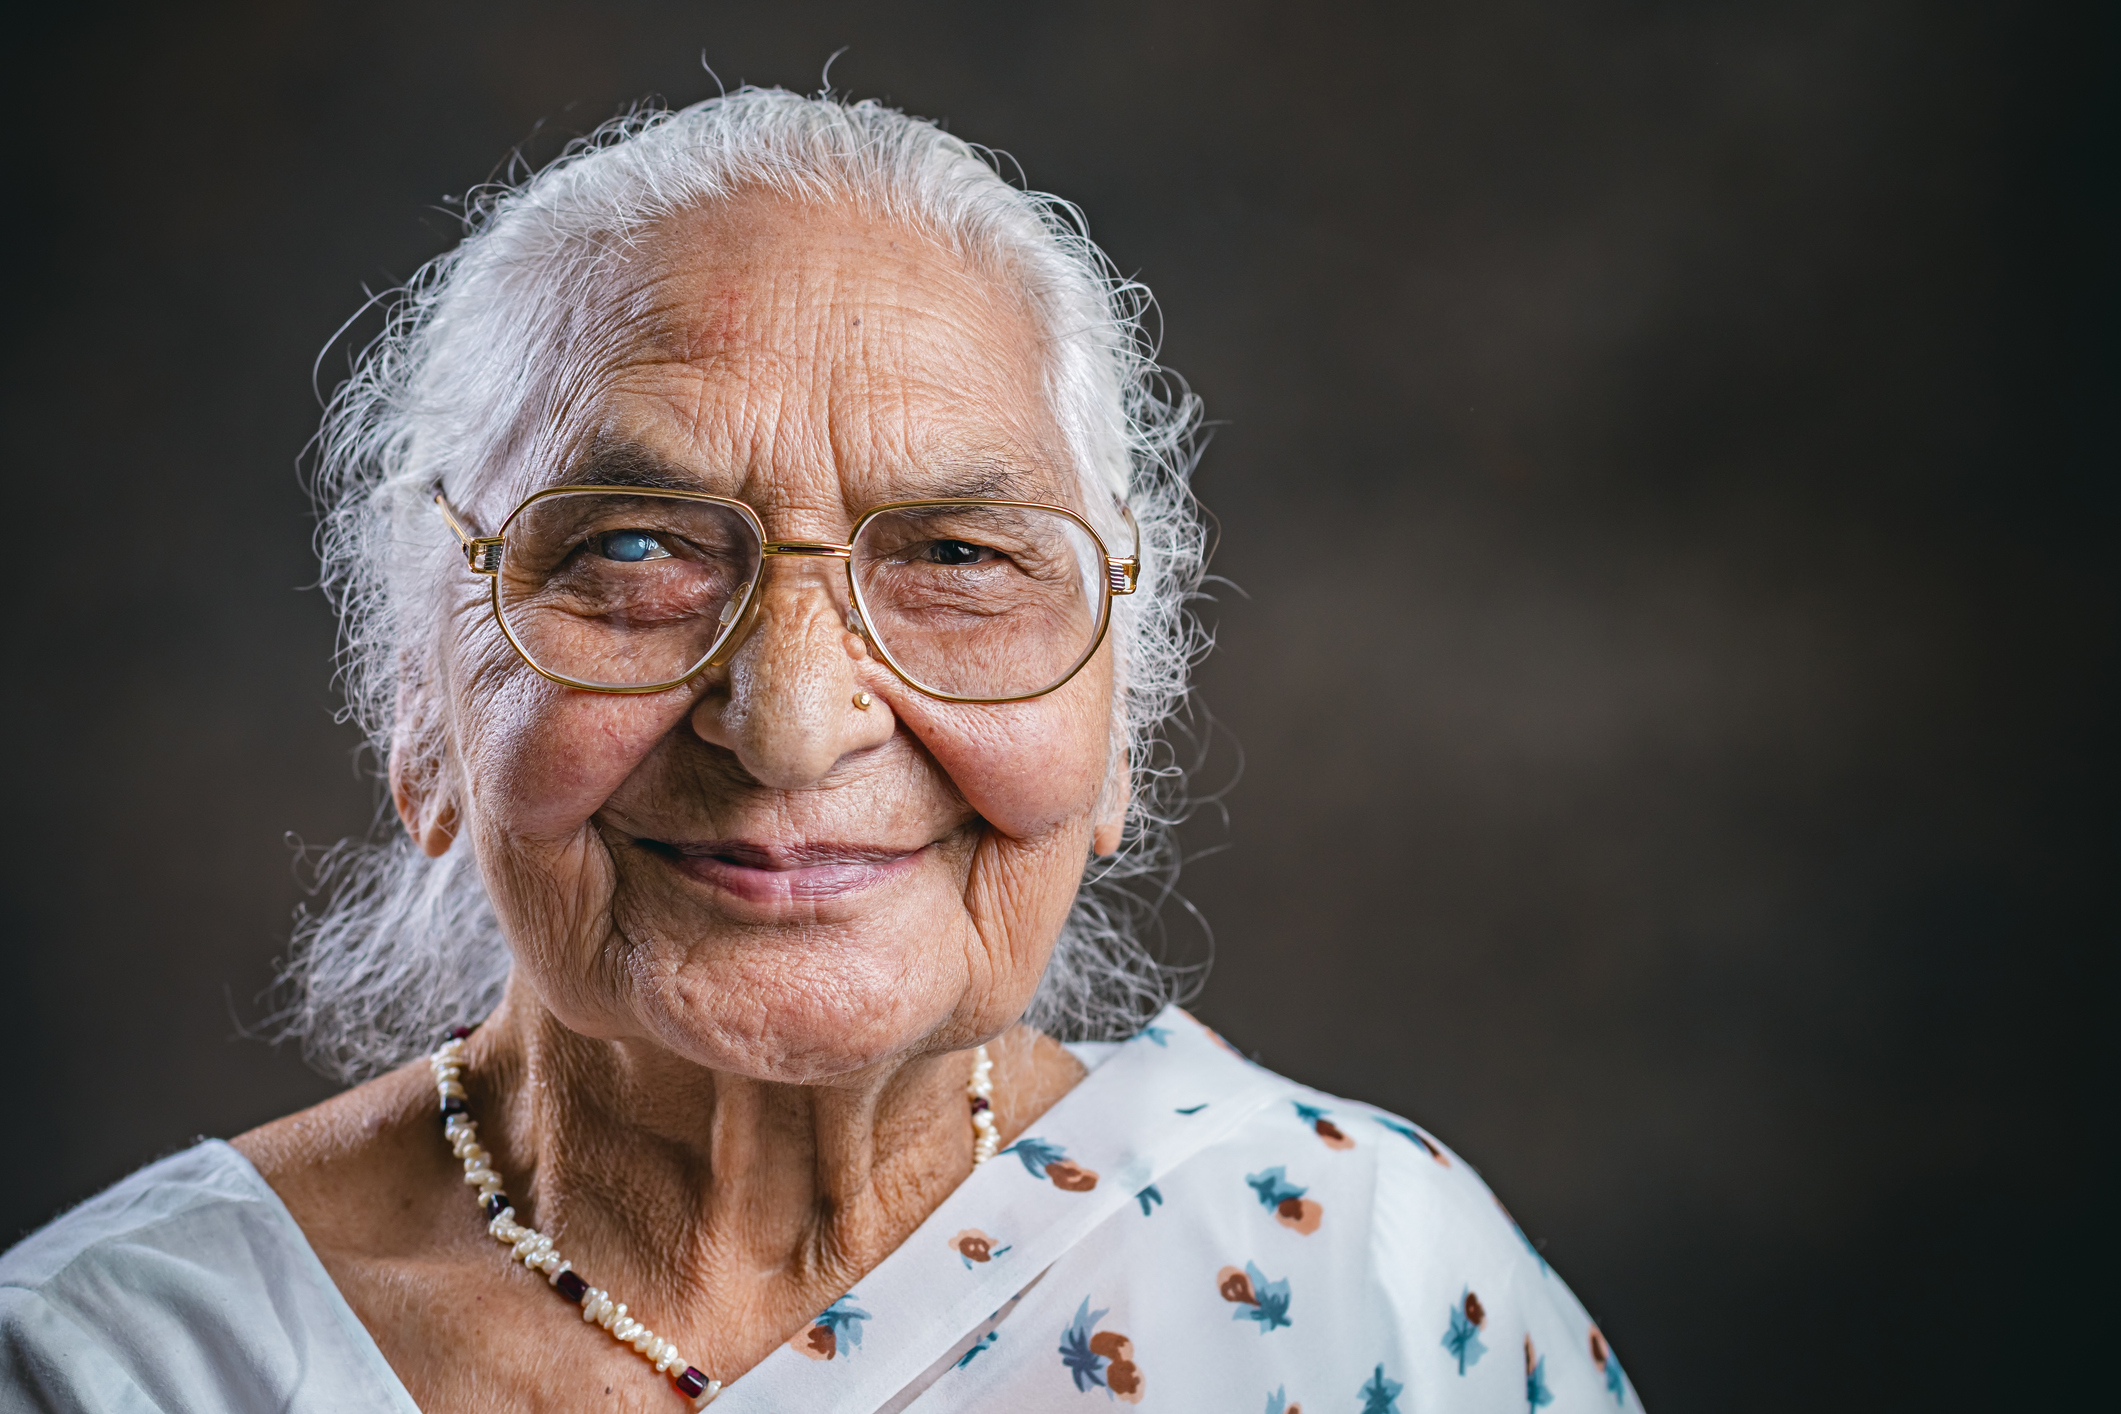 An elderly South Asian woman wearing a white sari, a beaded necklace, and gold wire rimmed glasses smiles for the camera. Her left eye is brown and healthy, while her right eye is covered by a white film substance called a cataract.